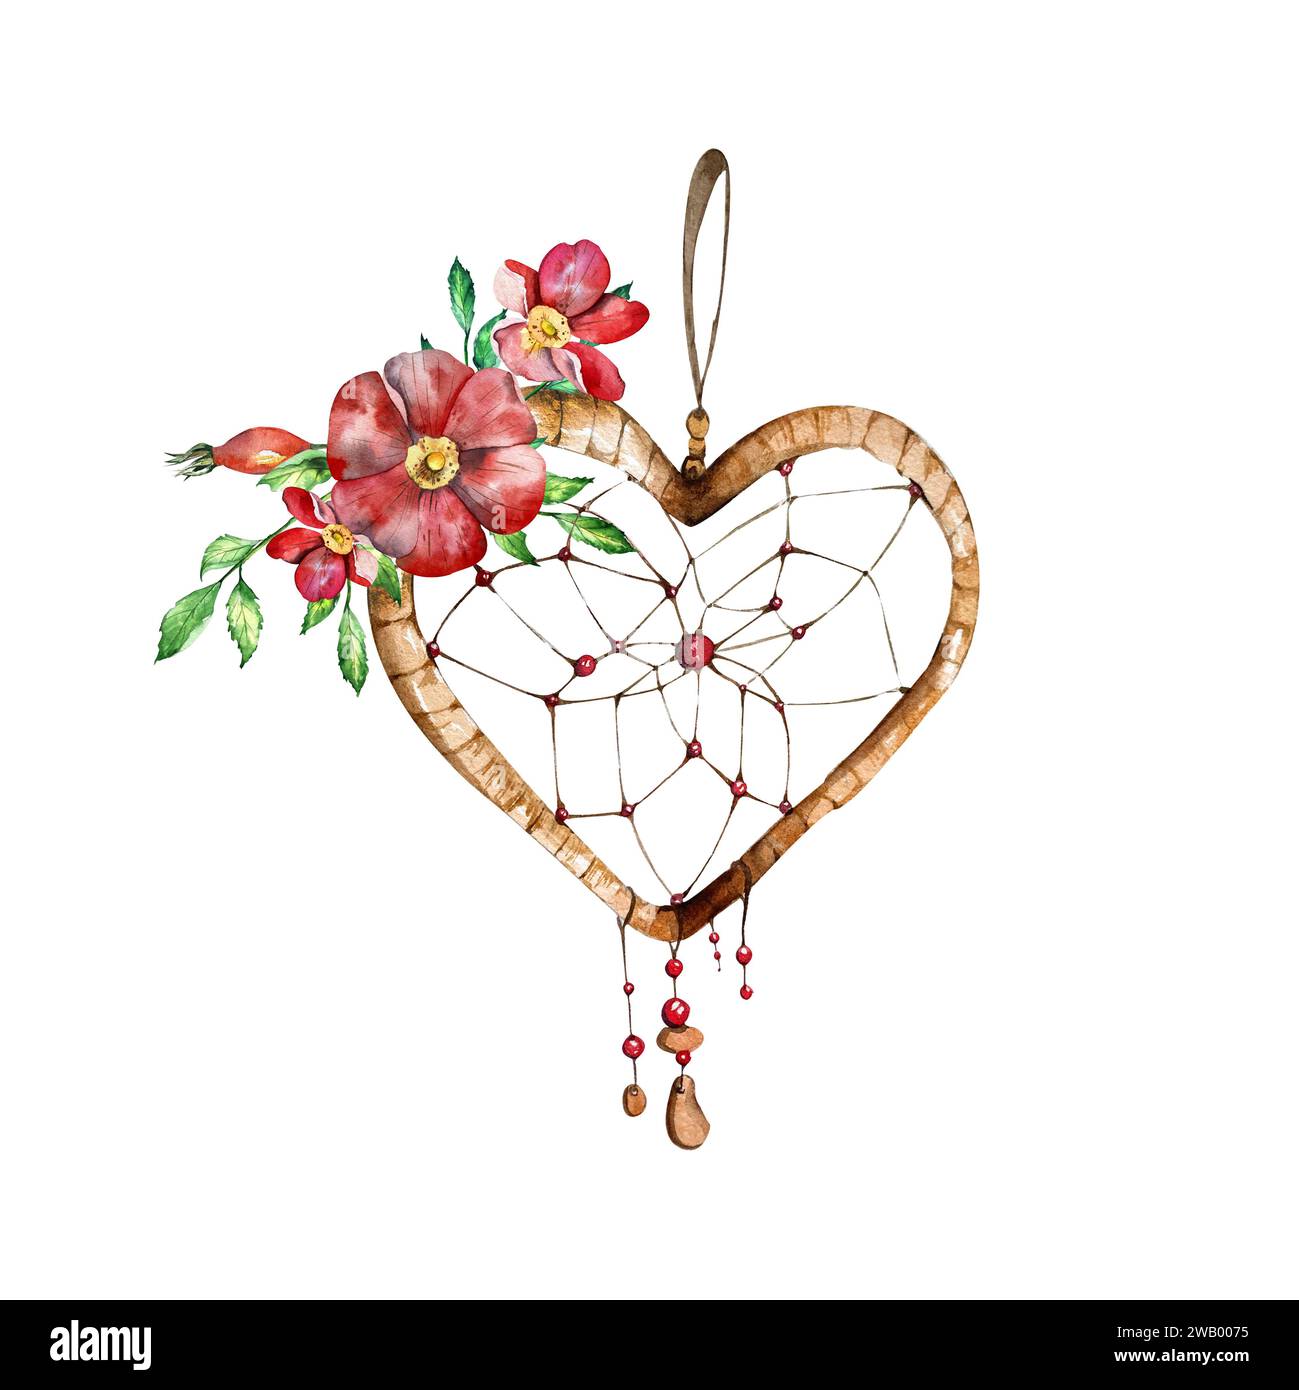 watercolor composition of a dreamcatcher in the form of a heart and rosehip flowers. handmade work. isolated on a white background. suitable for decor Stock Photo